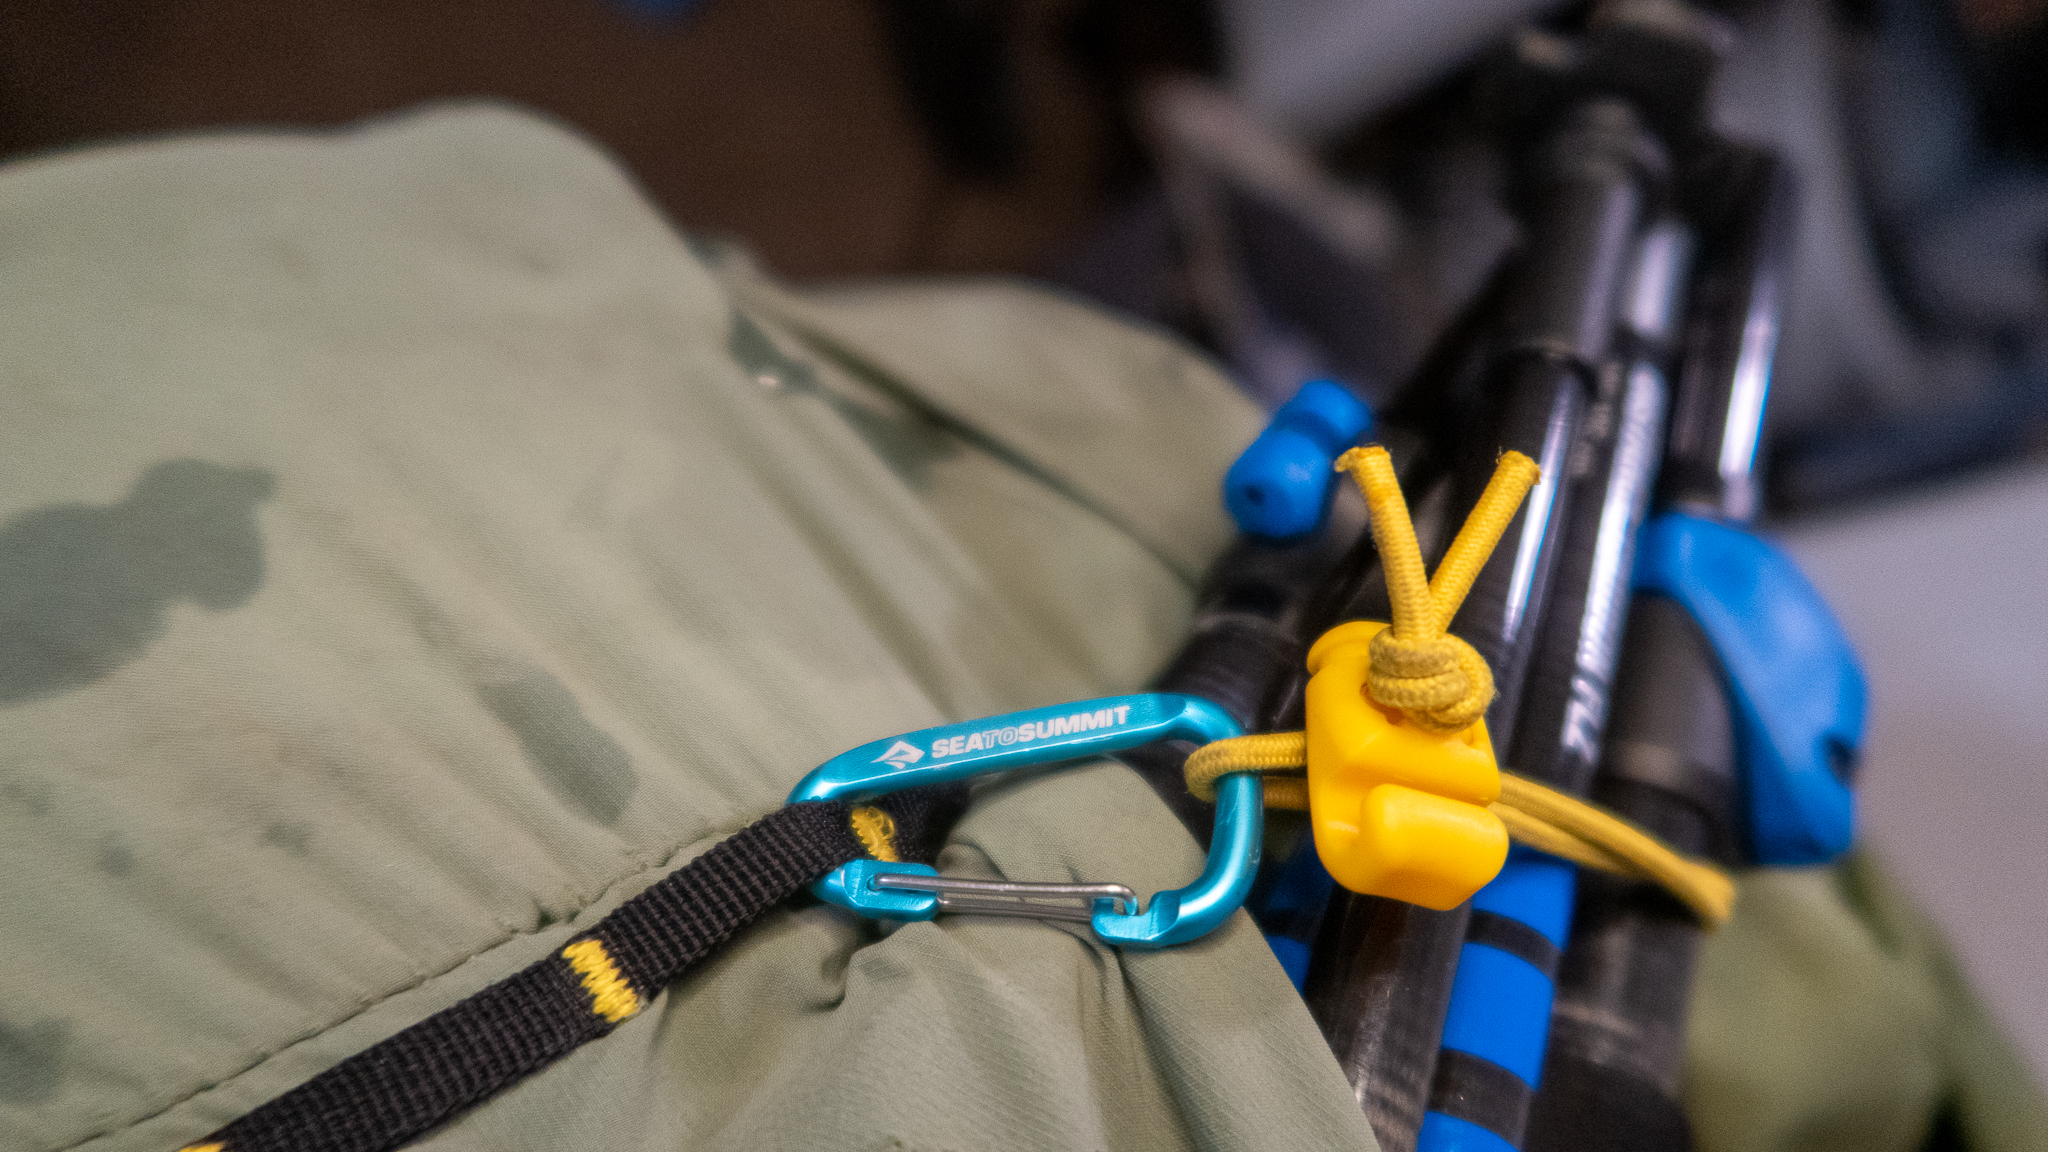 Mini Carabiners to Enhance the Side Bungee Chords on the Fastpack 40